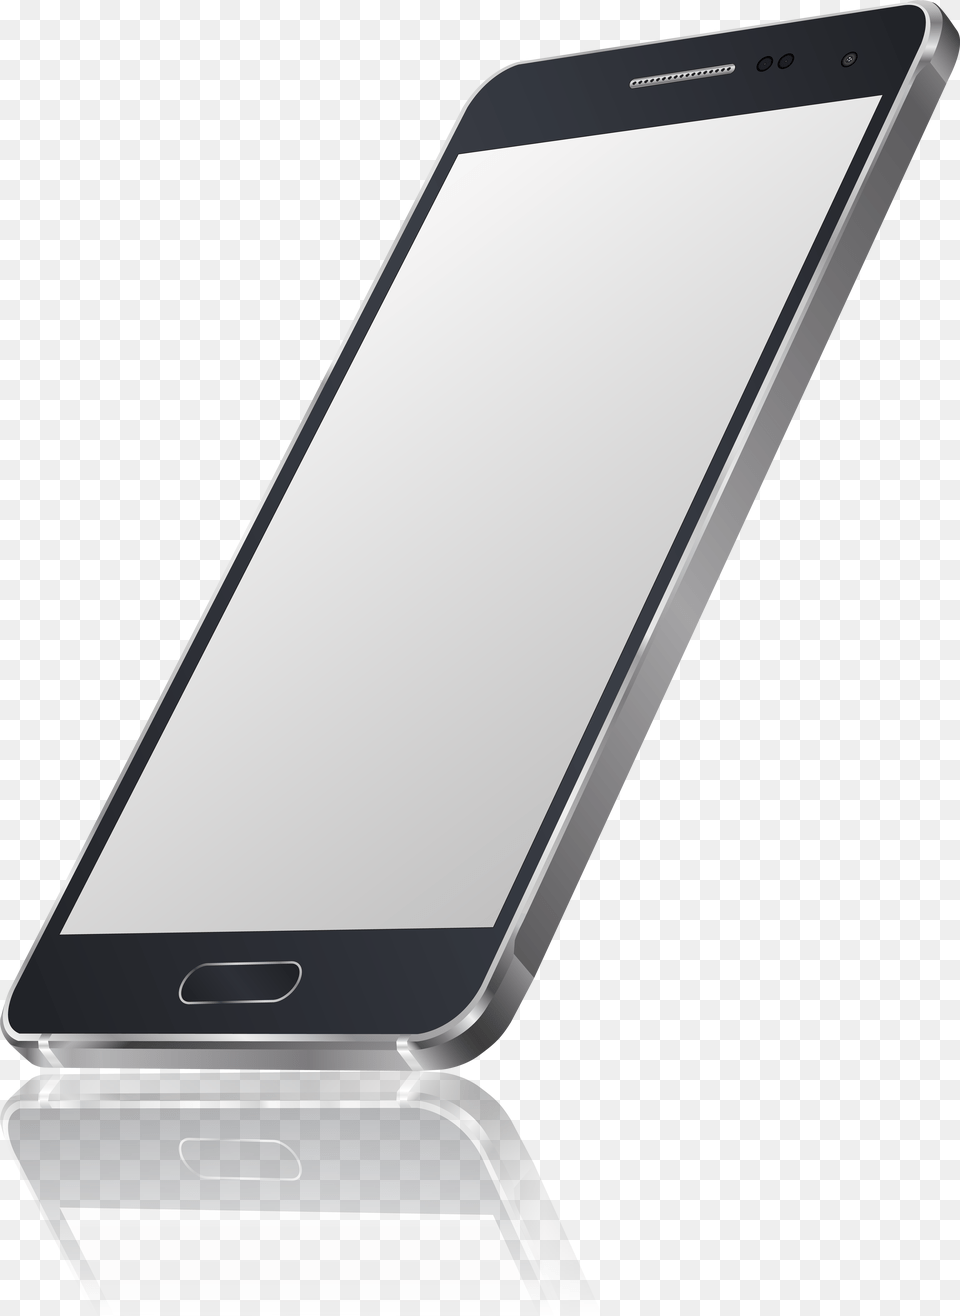 Smartphone Clip Art Smartphone, Electronics, Mobile Phone, Phone, Iphone Png Image